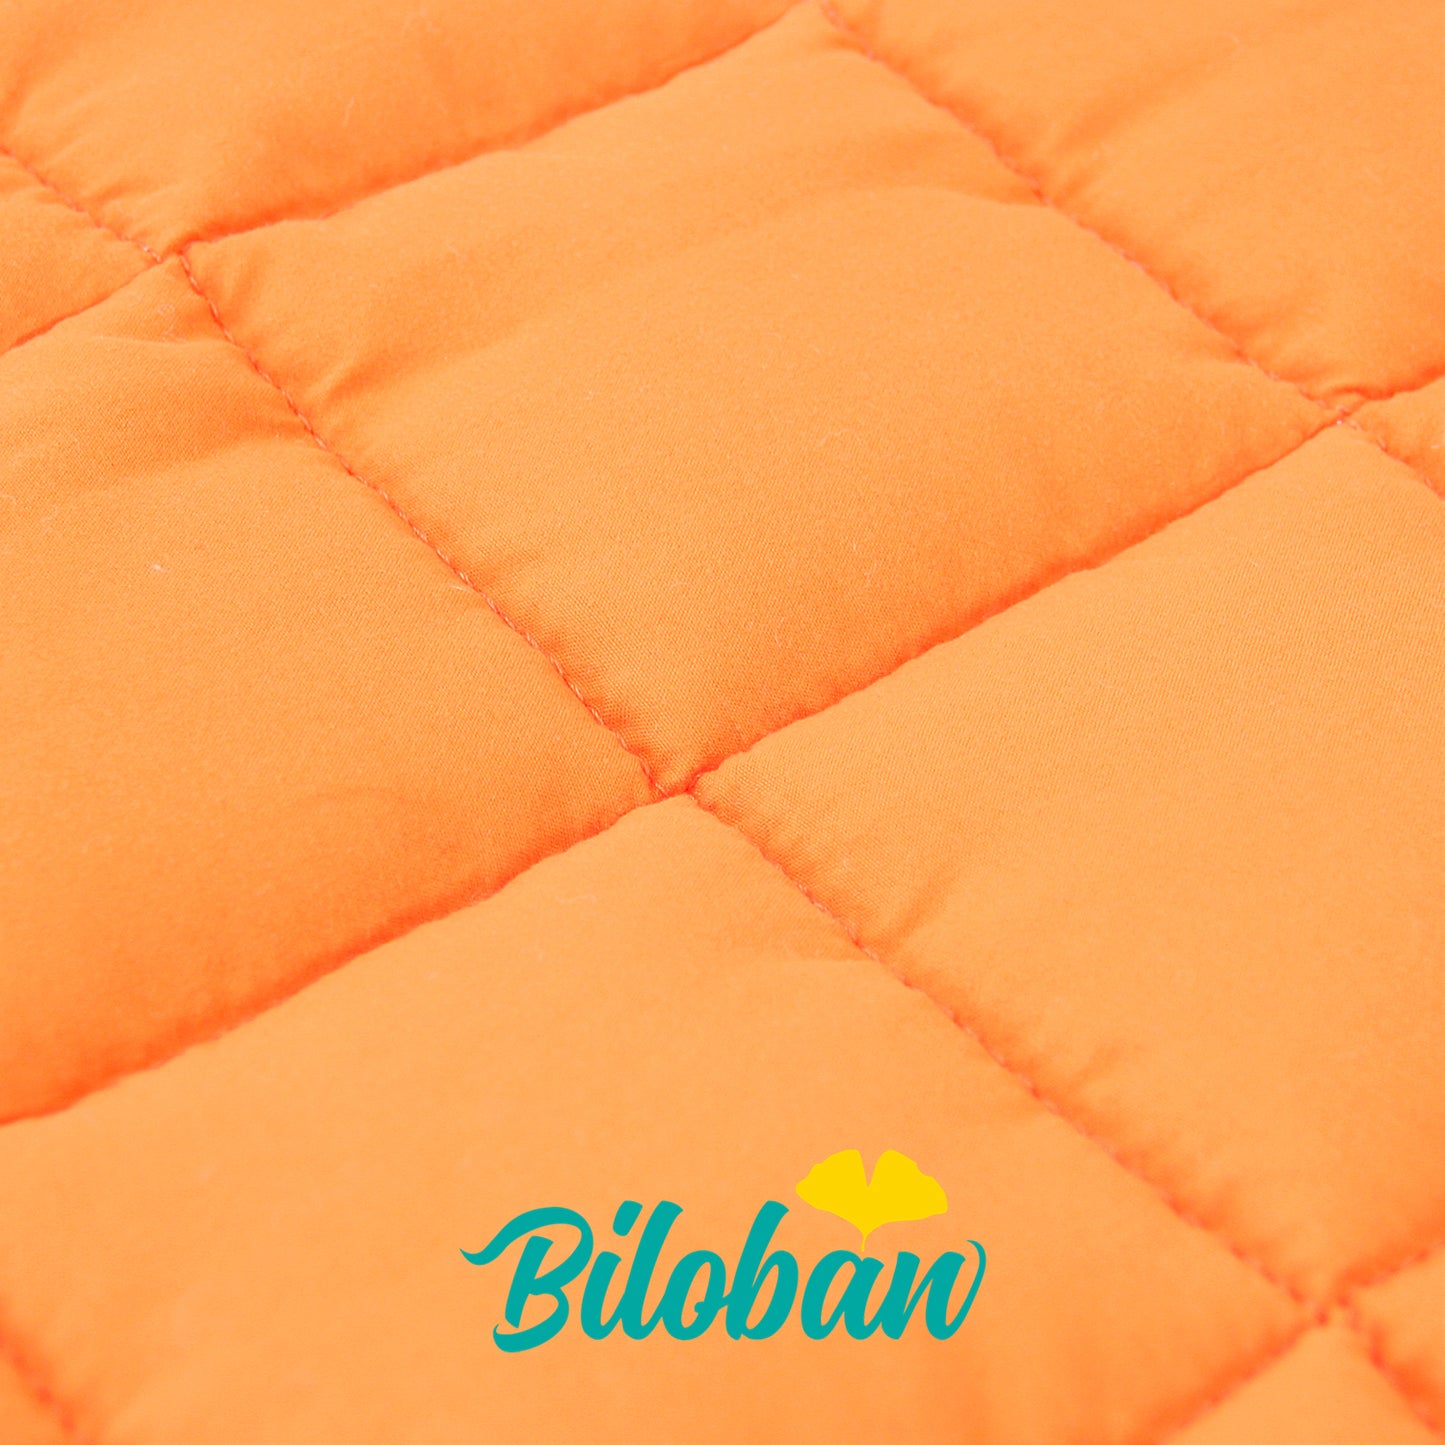 Toddler Nap Mat - Convenient, Portable, A Carry Handle, Perfect for Daycare, Fish Pattern - Biloban Online Store